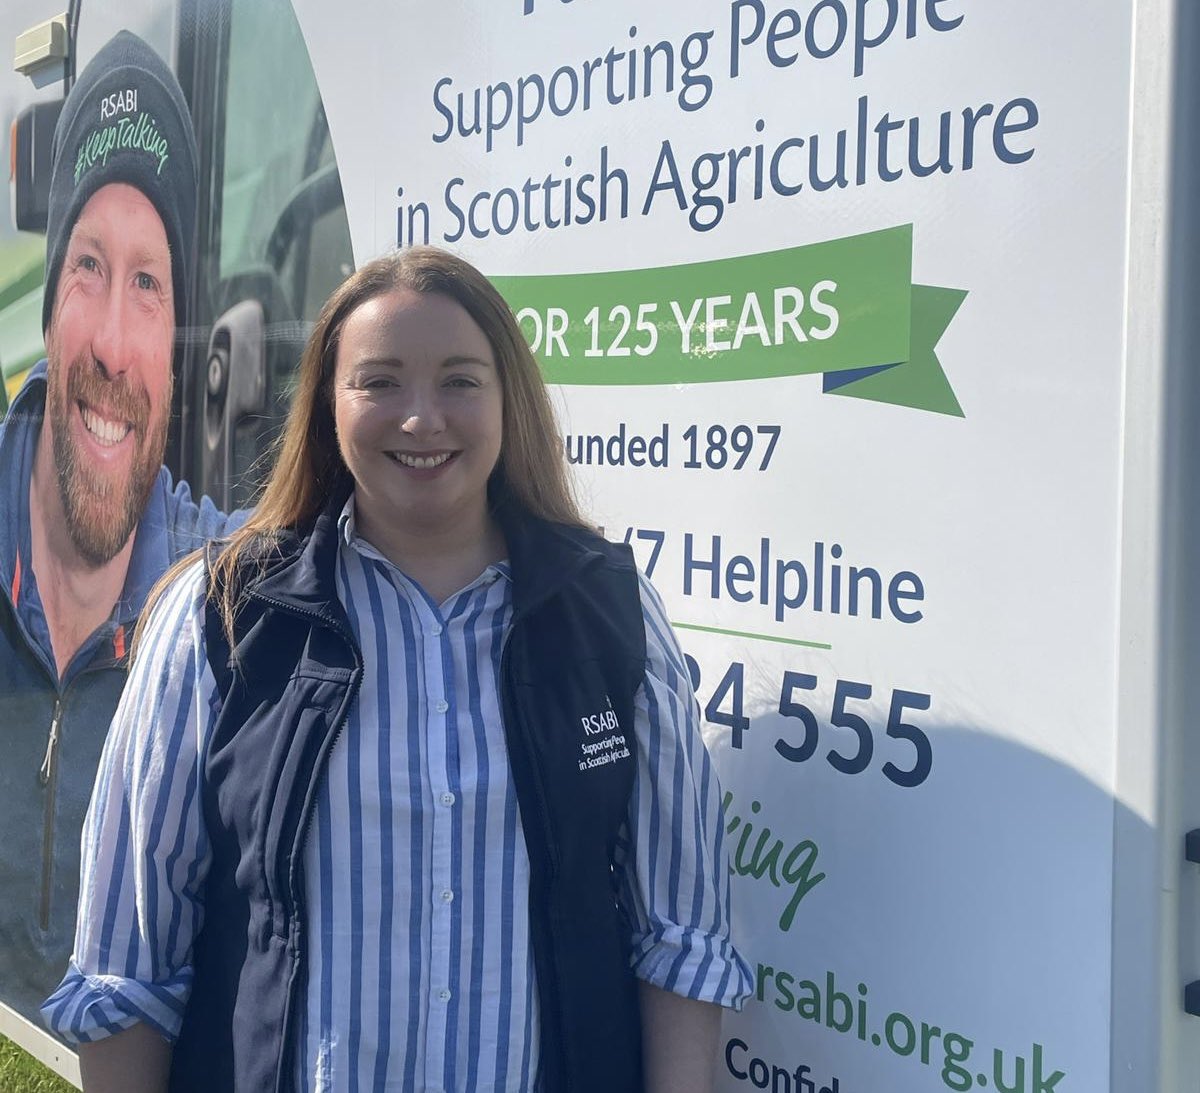 A very warm welcome to Laura Young who has this week joined RSABI as Fundraising Executive. Laura, who is from a farming family, is pictured in action this morning at Fife Show. Laura’s previous roles include summer work with @The_RHASS and @ScotlandRHShow and more recently, in